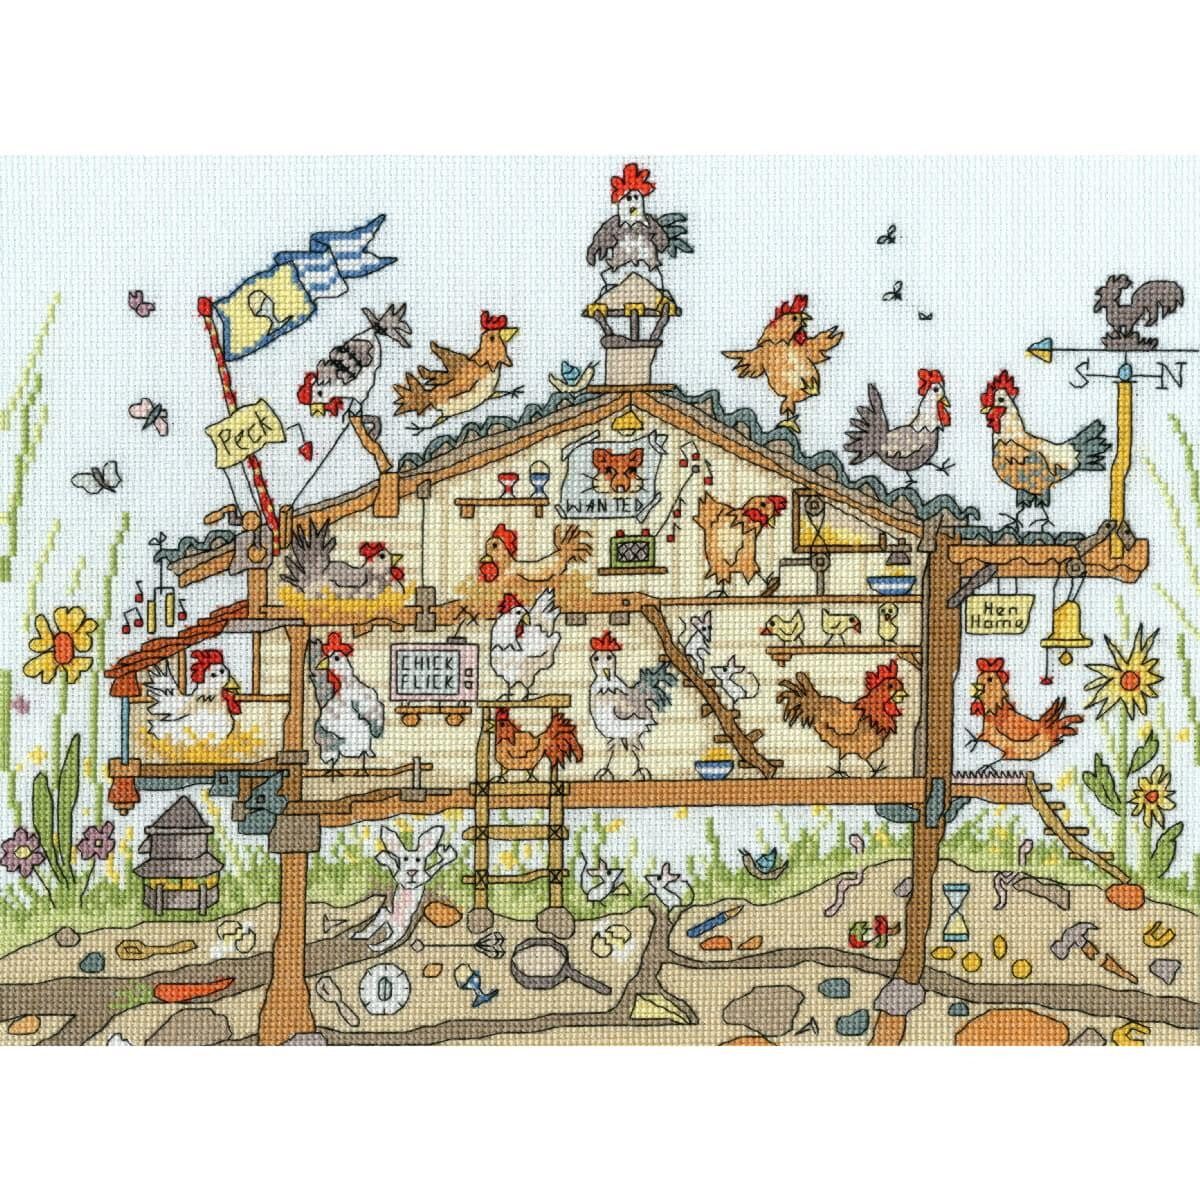 A whimsical illustration of a chicken coop full of lively...